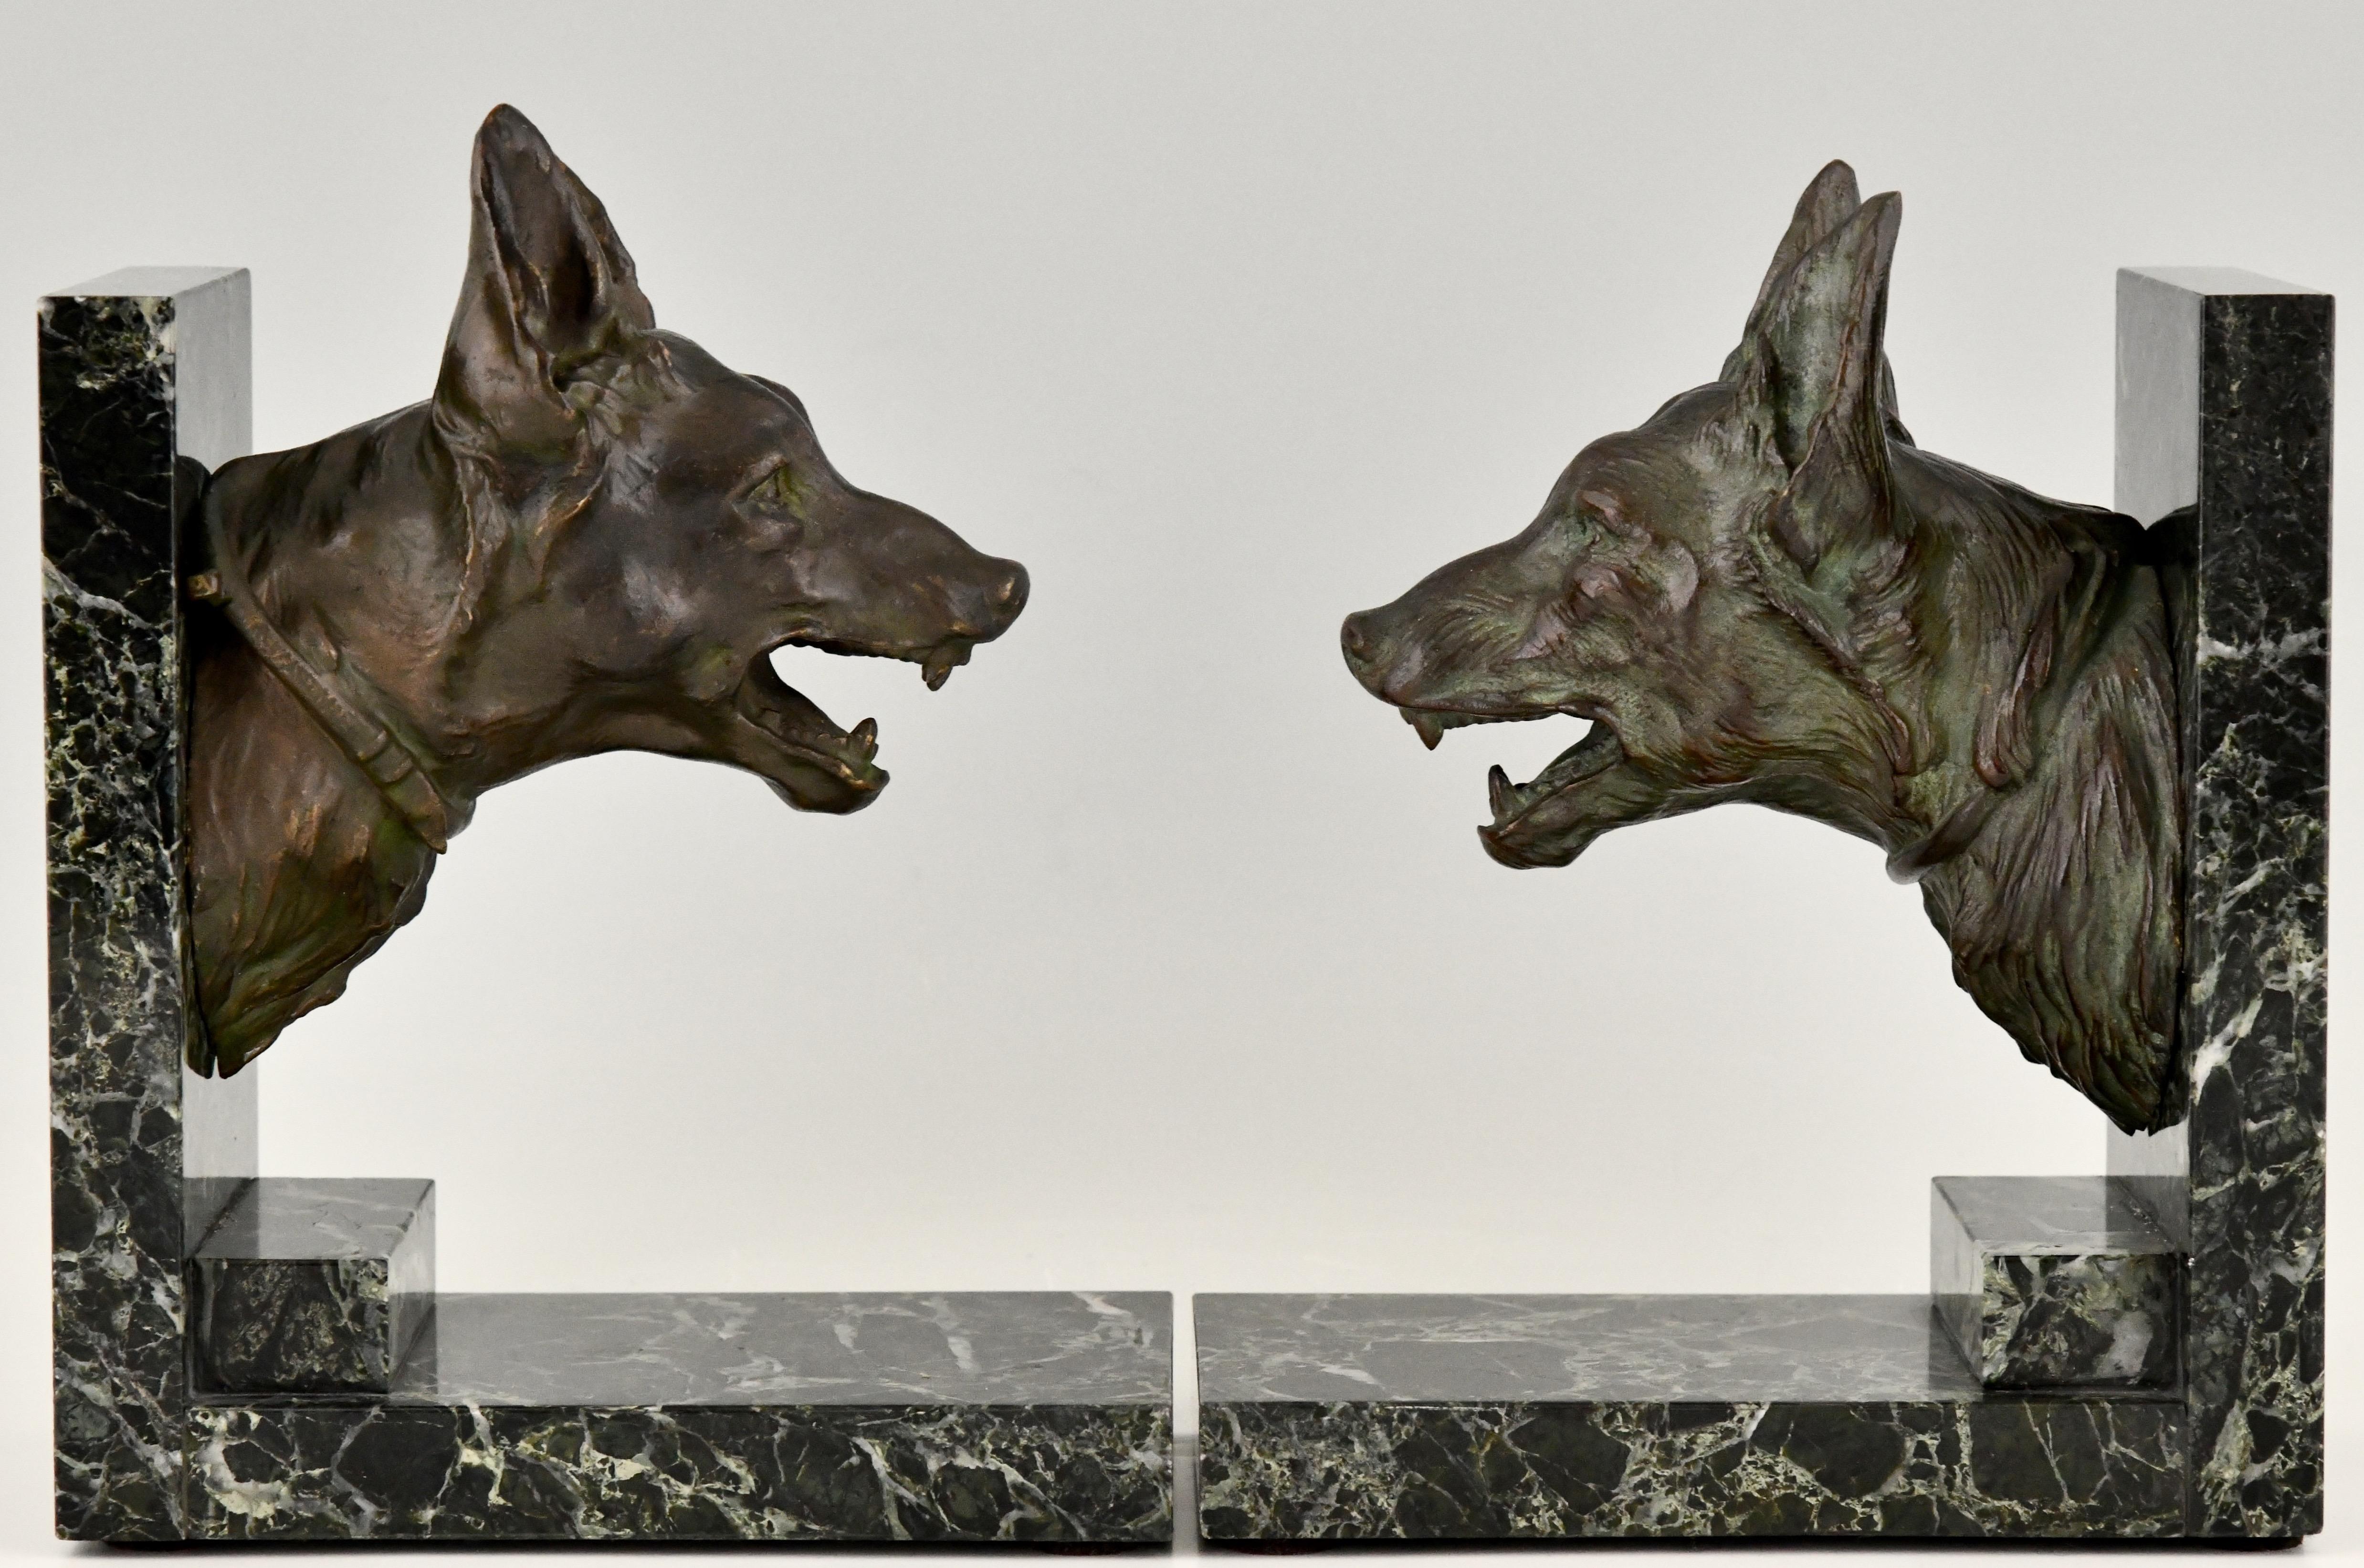 Patinated Art Deco Bronze Bookends with Shepherd Dogs by Varnier, France, 1925